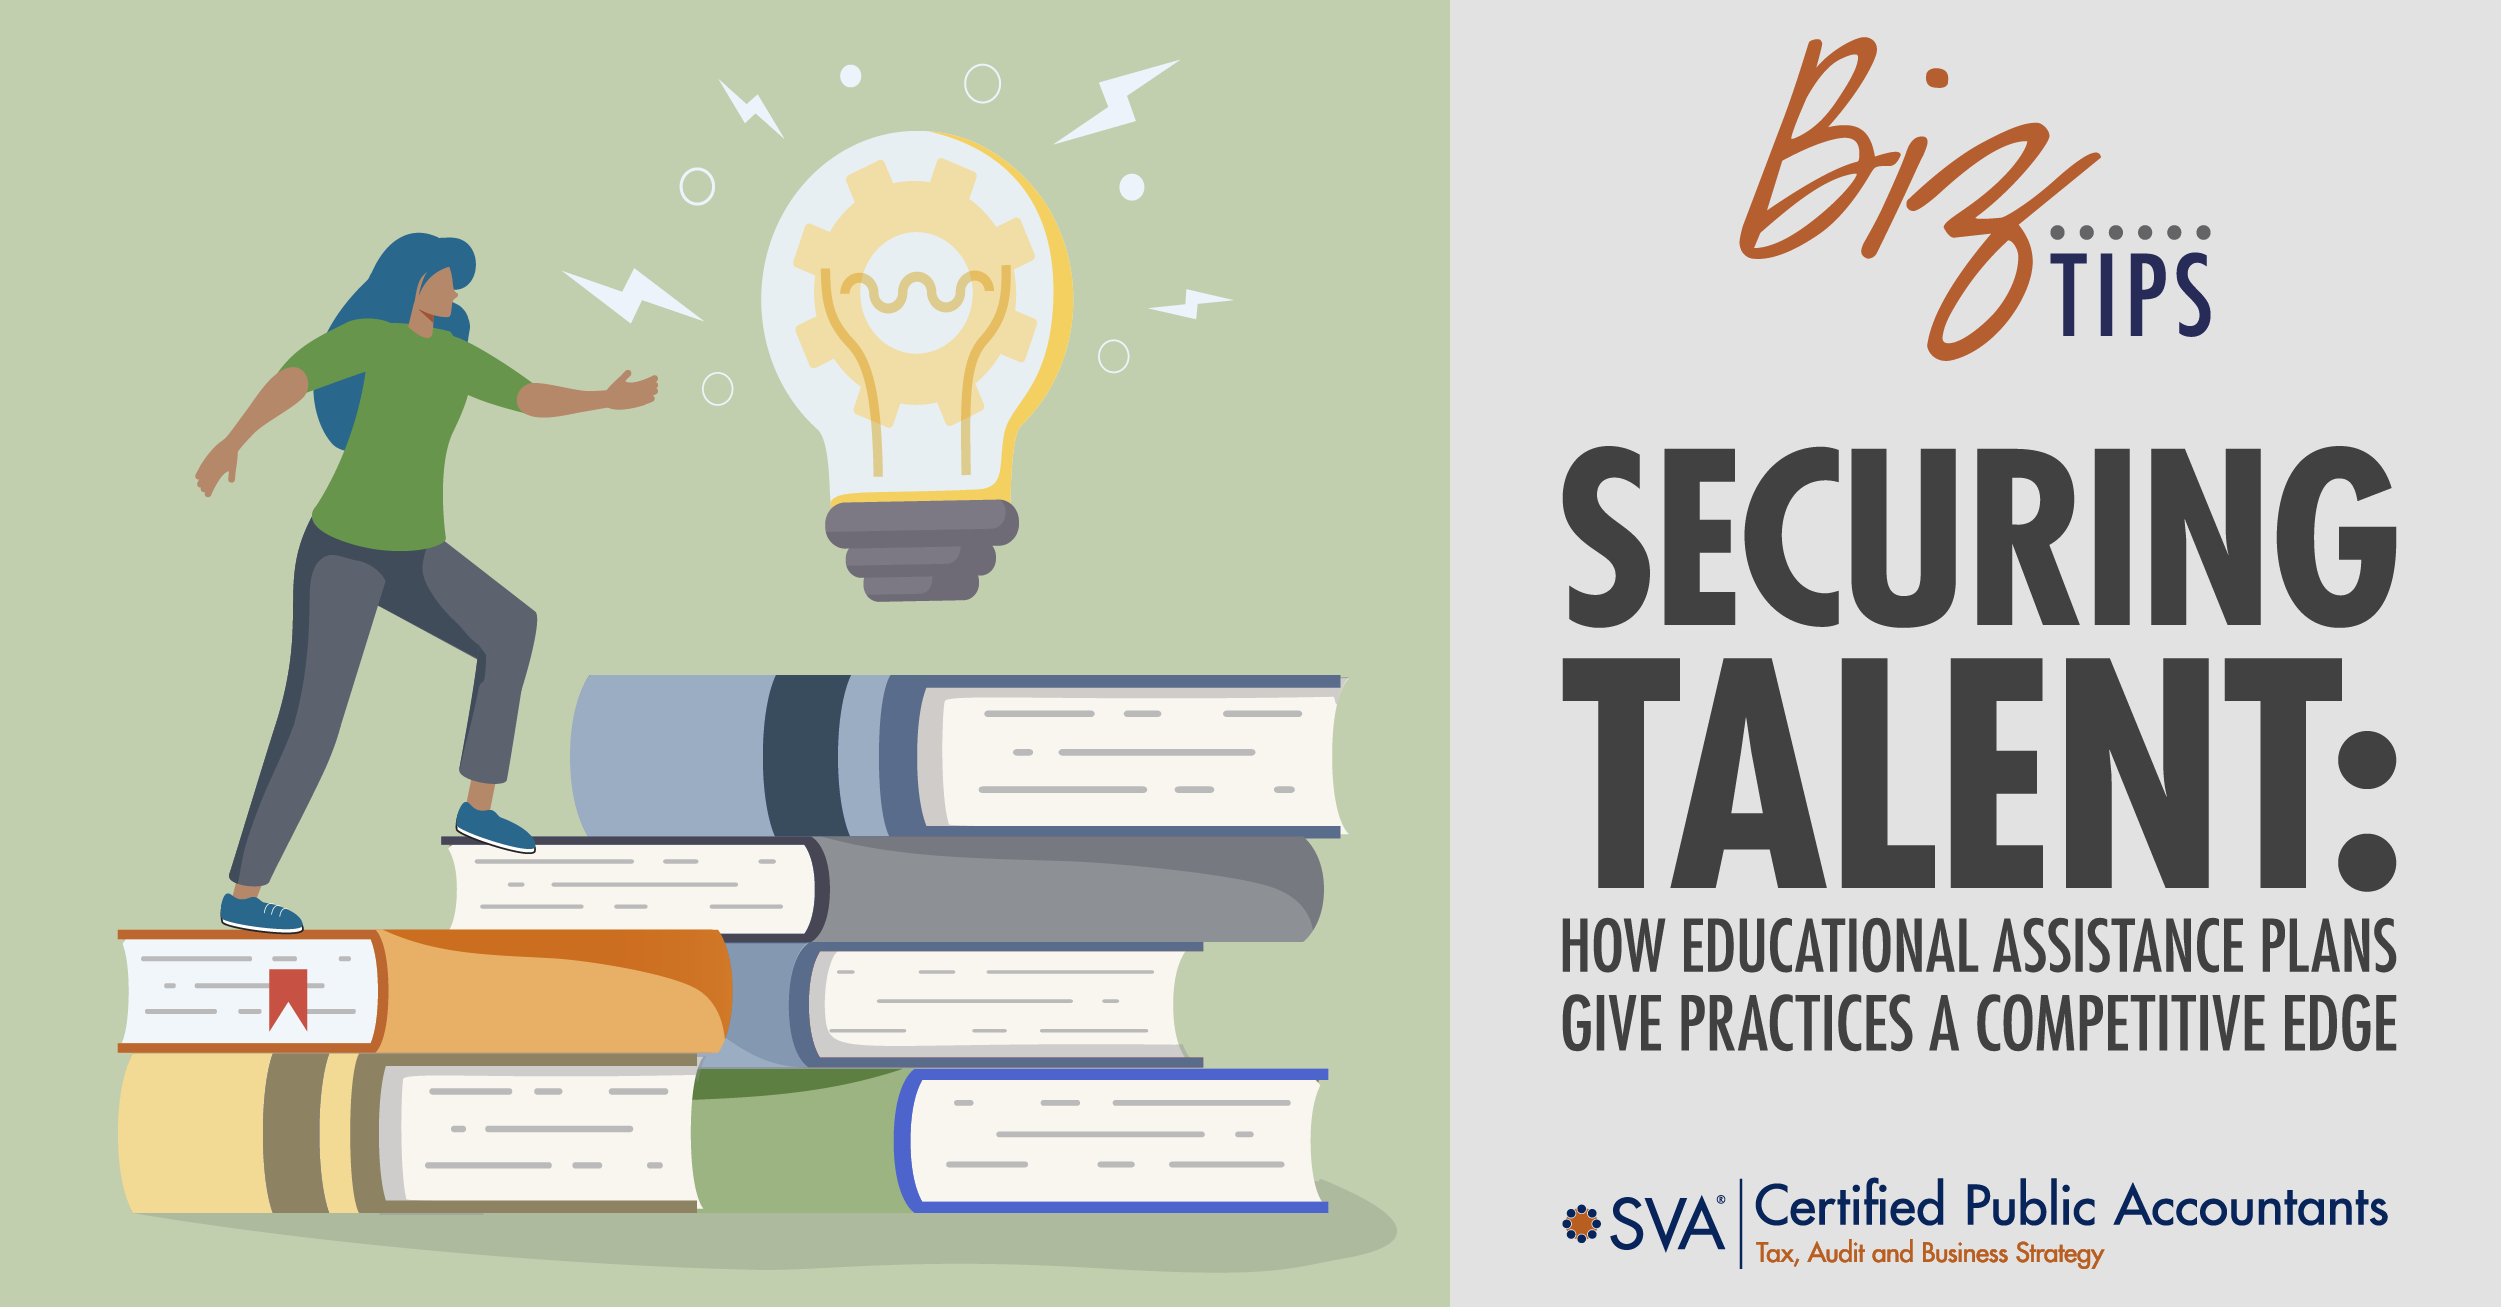 Securing Talent: How Educational Assistance Plans Give Practices a Competitive Edge